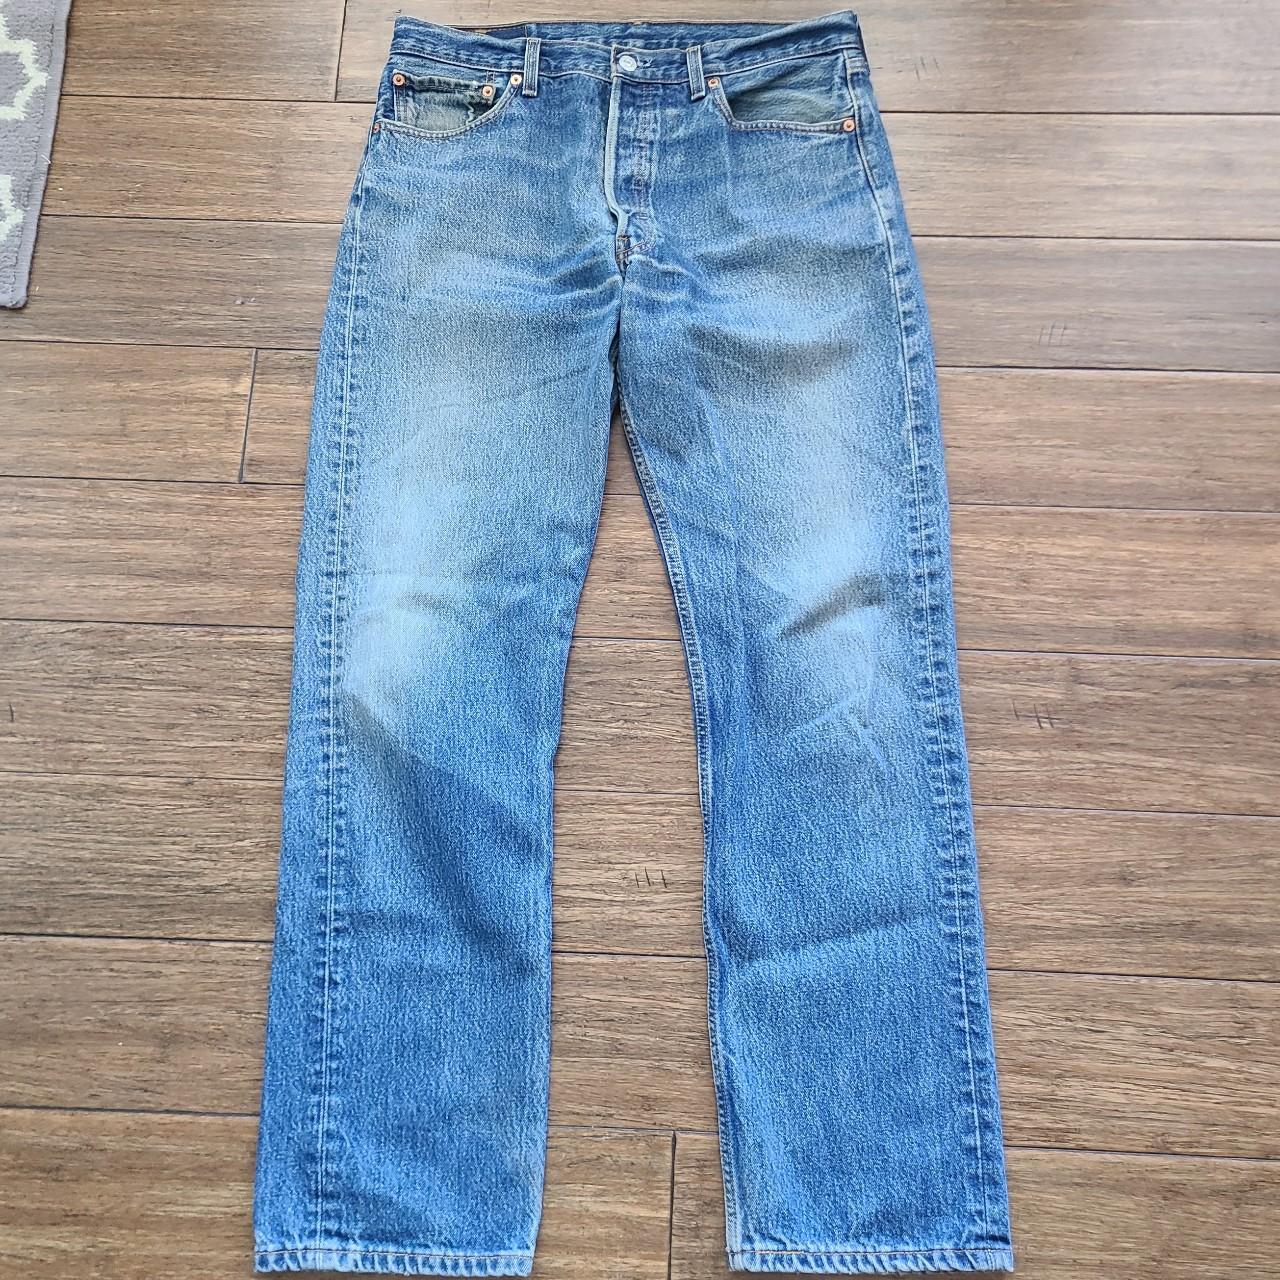 Levis 501 XX Jeans In great condition, perfect fade... - Depop